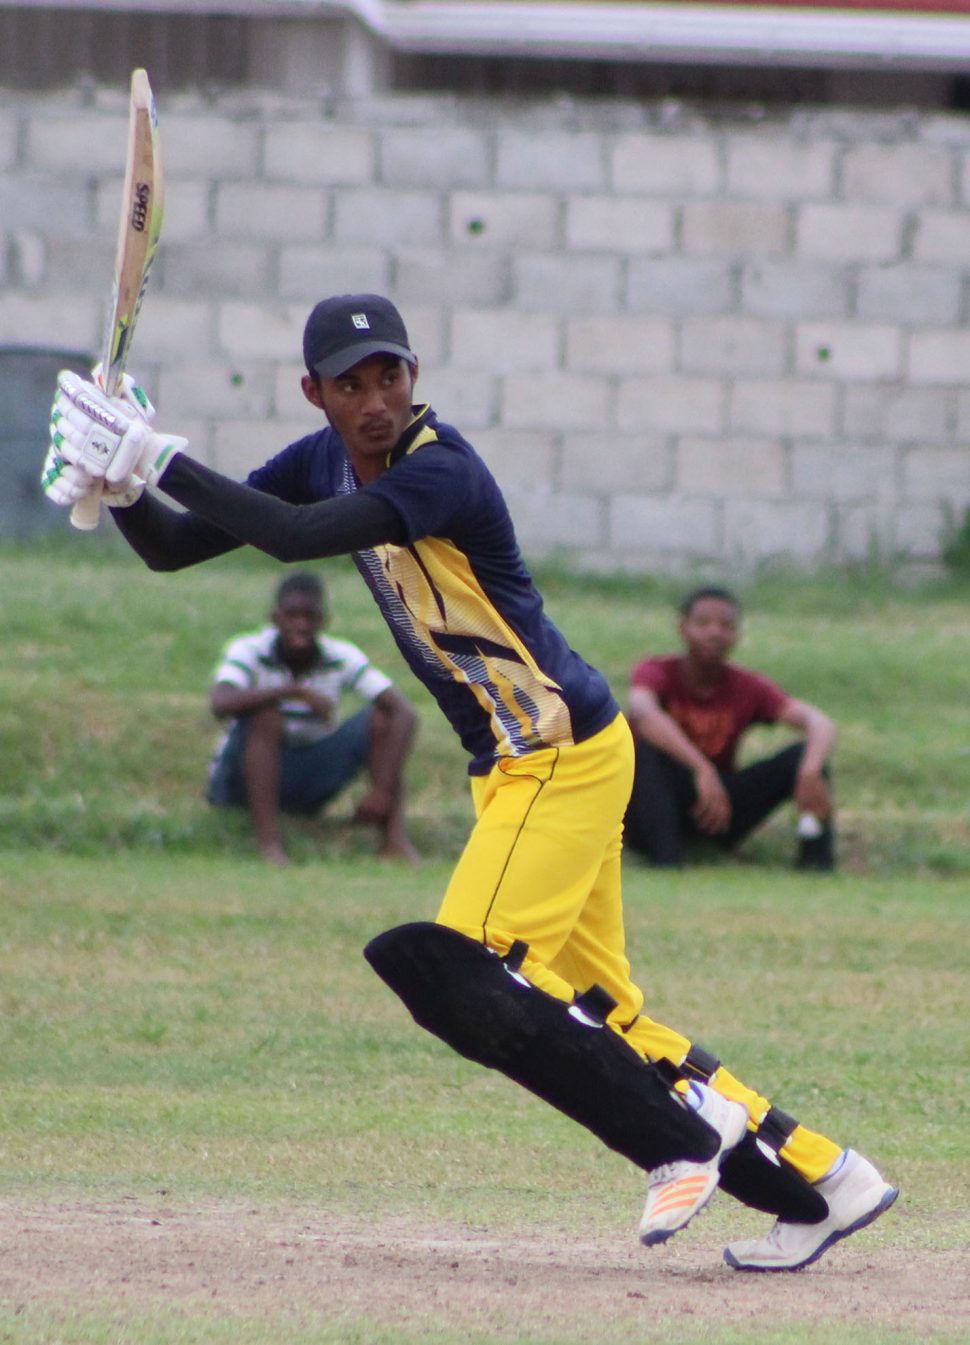 Darshan Persaud recorded a brilliant effort with both bat and ball to see his side past defending champions DCC